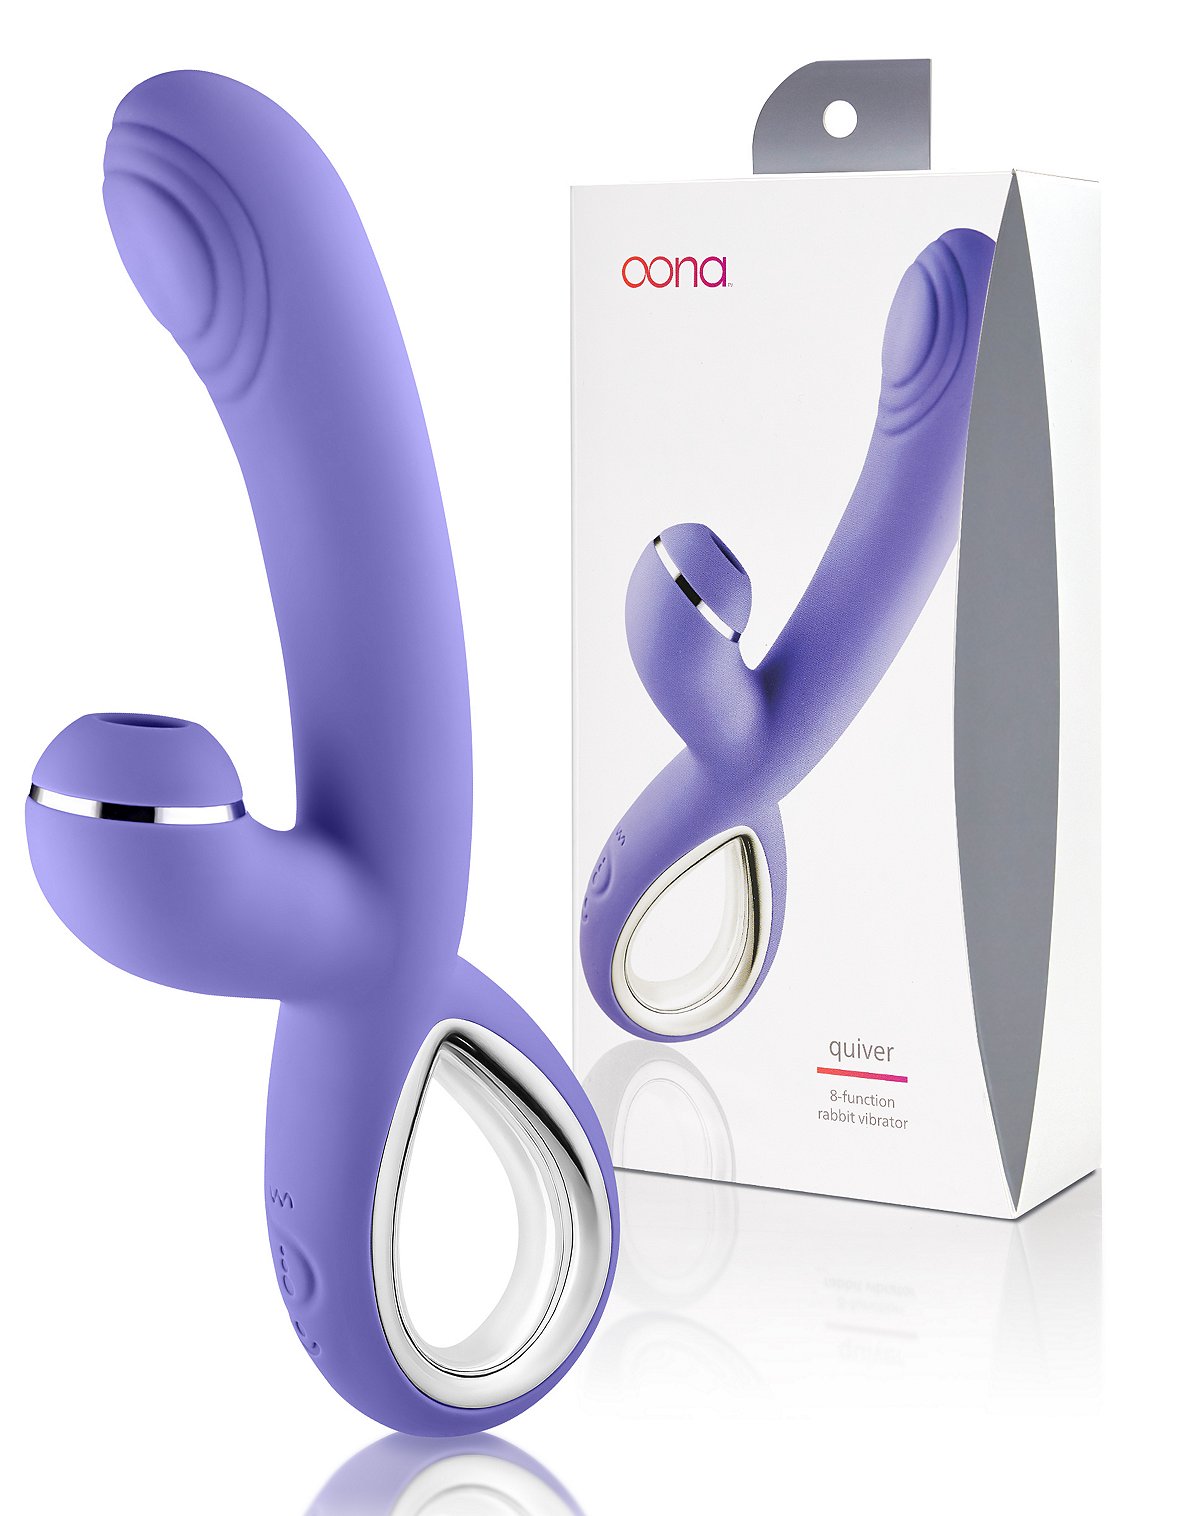 Oona Quiver multi-function rechargeable vibrator